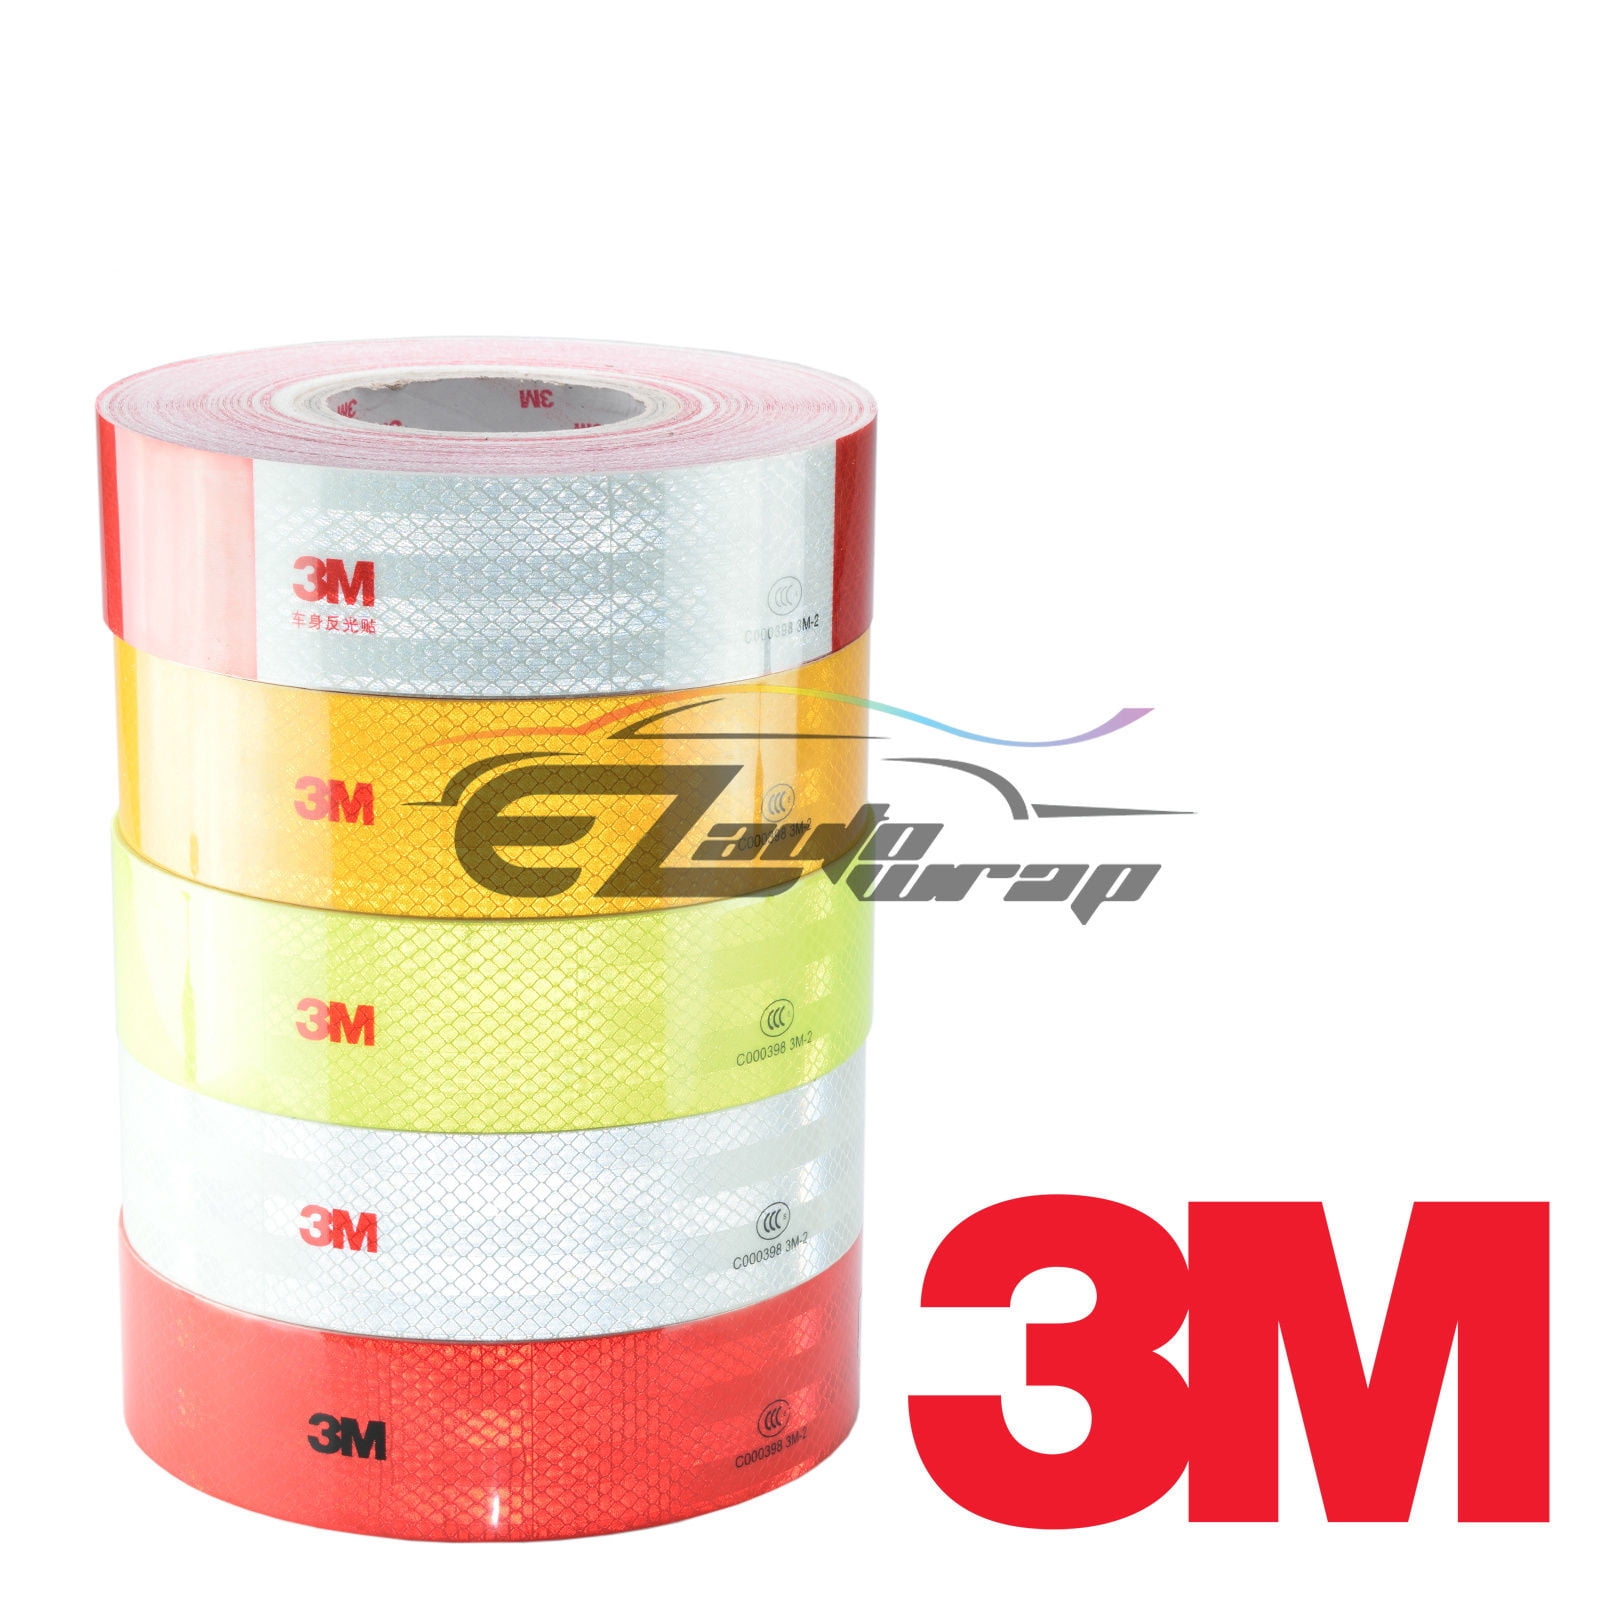 3M Diamond Grade White Conspicuity Tape 2" x 2" CE Approved Reflective Safety 